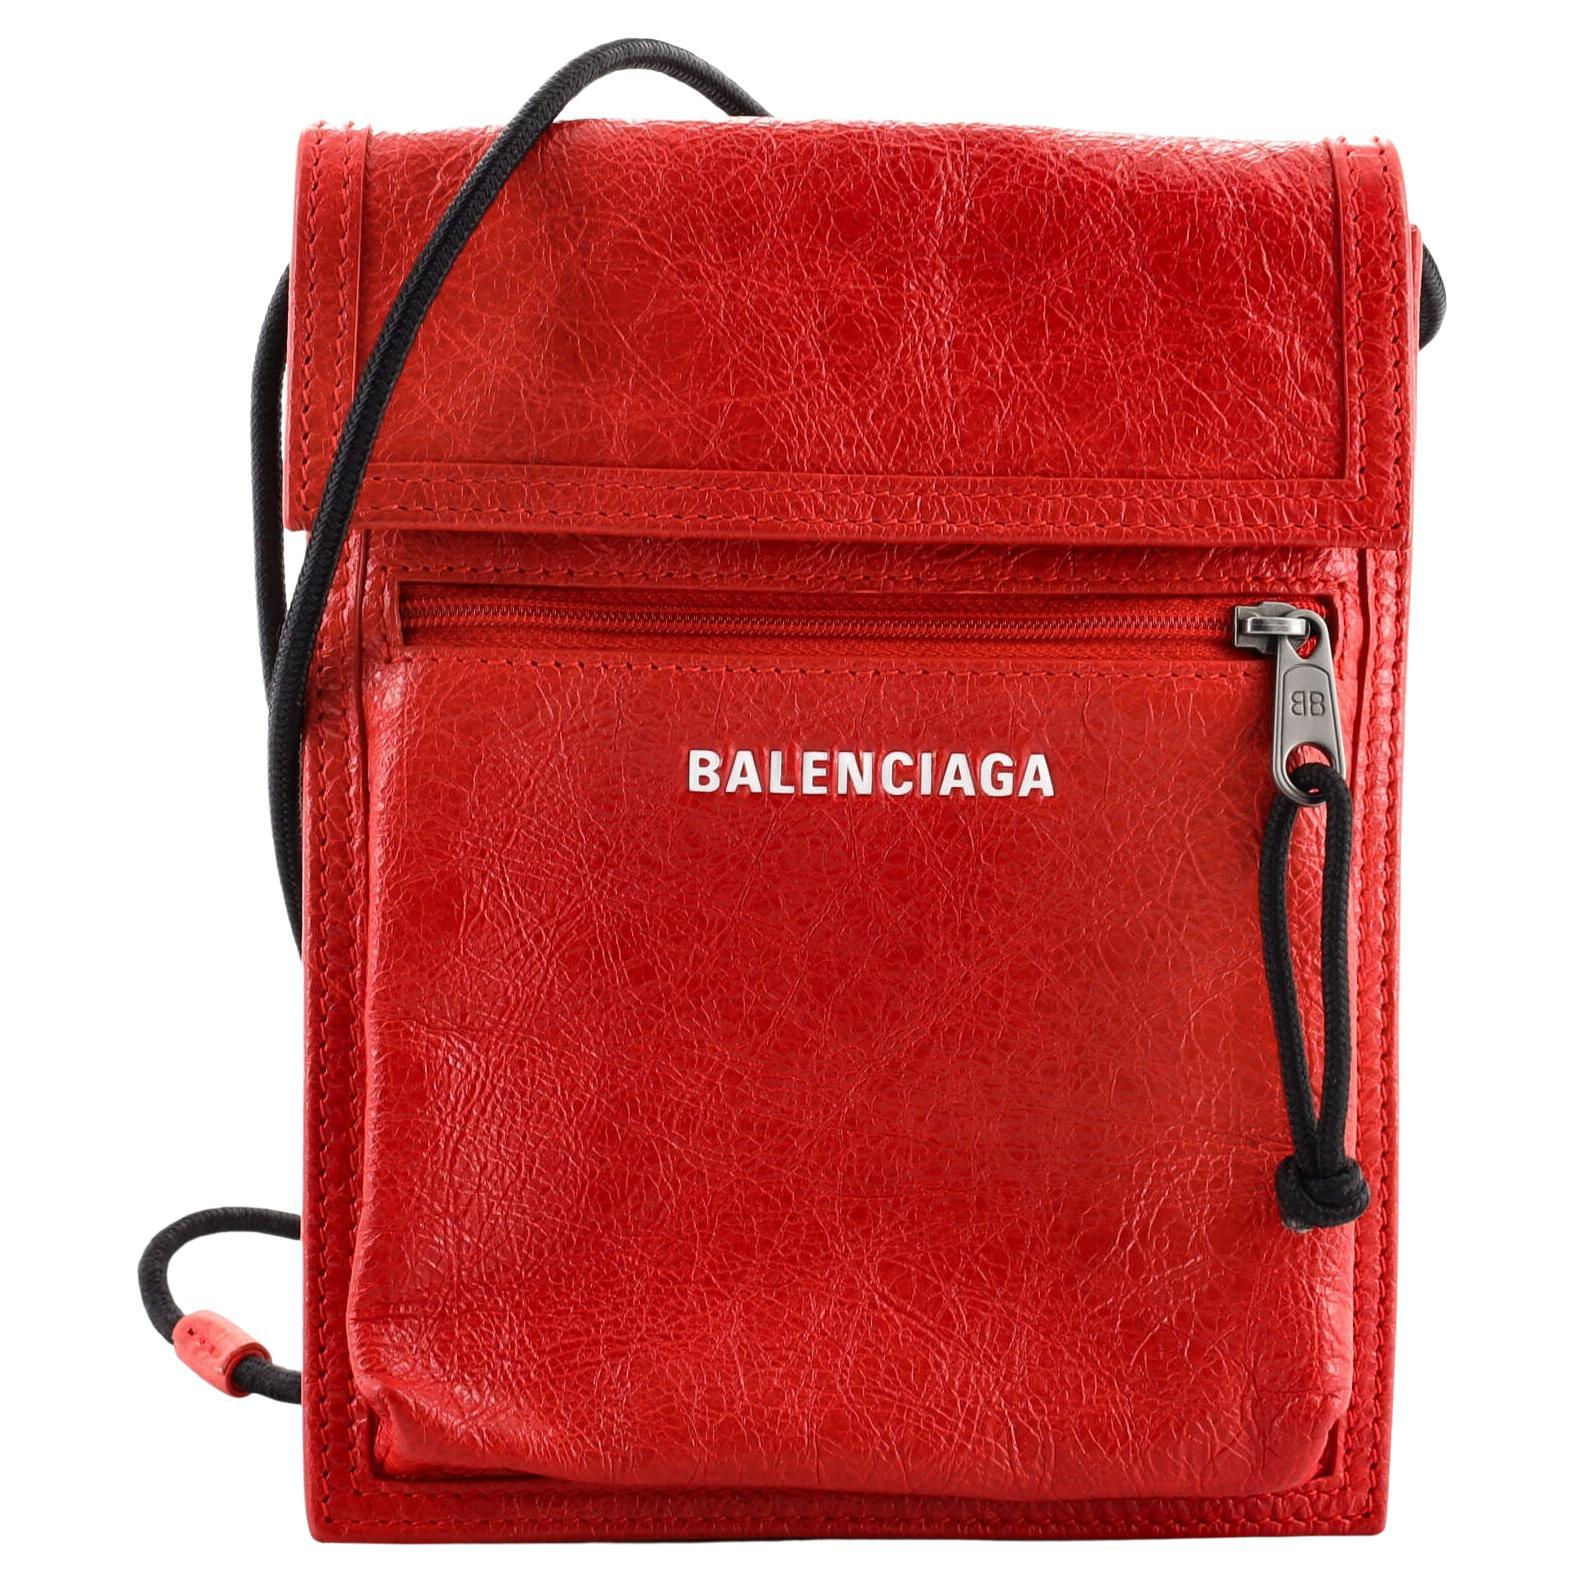 Balenciaga Leather Jewelry Cosmetic Travel Toiletry Carryall Bag at ...